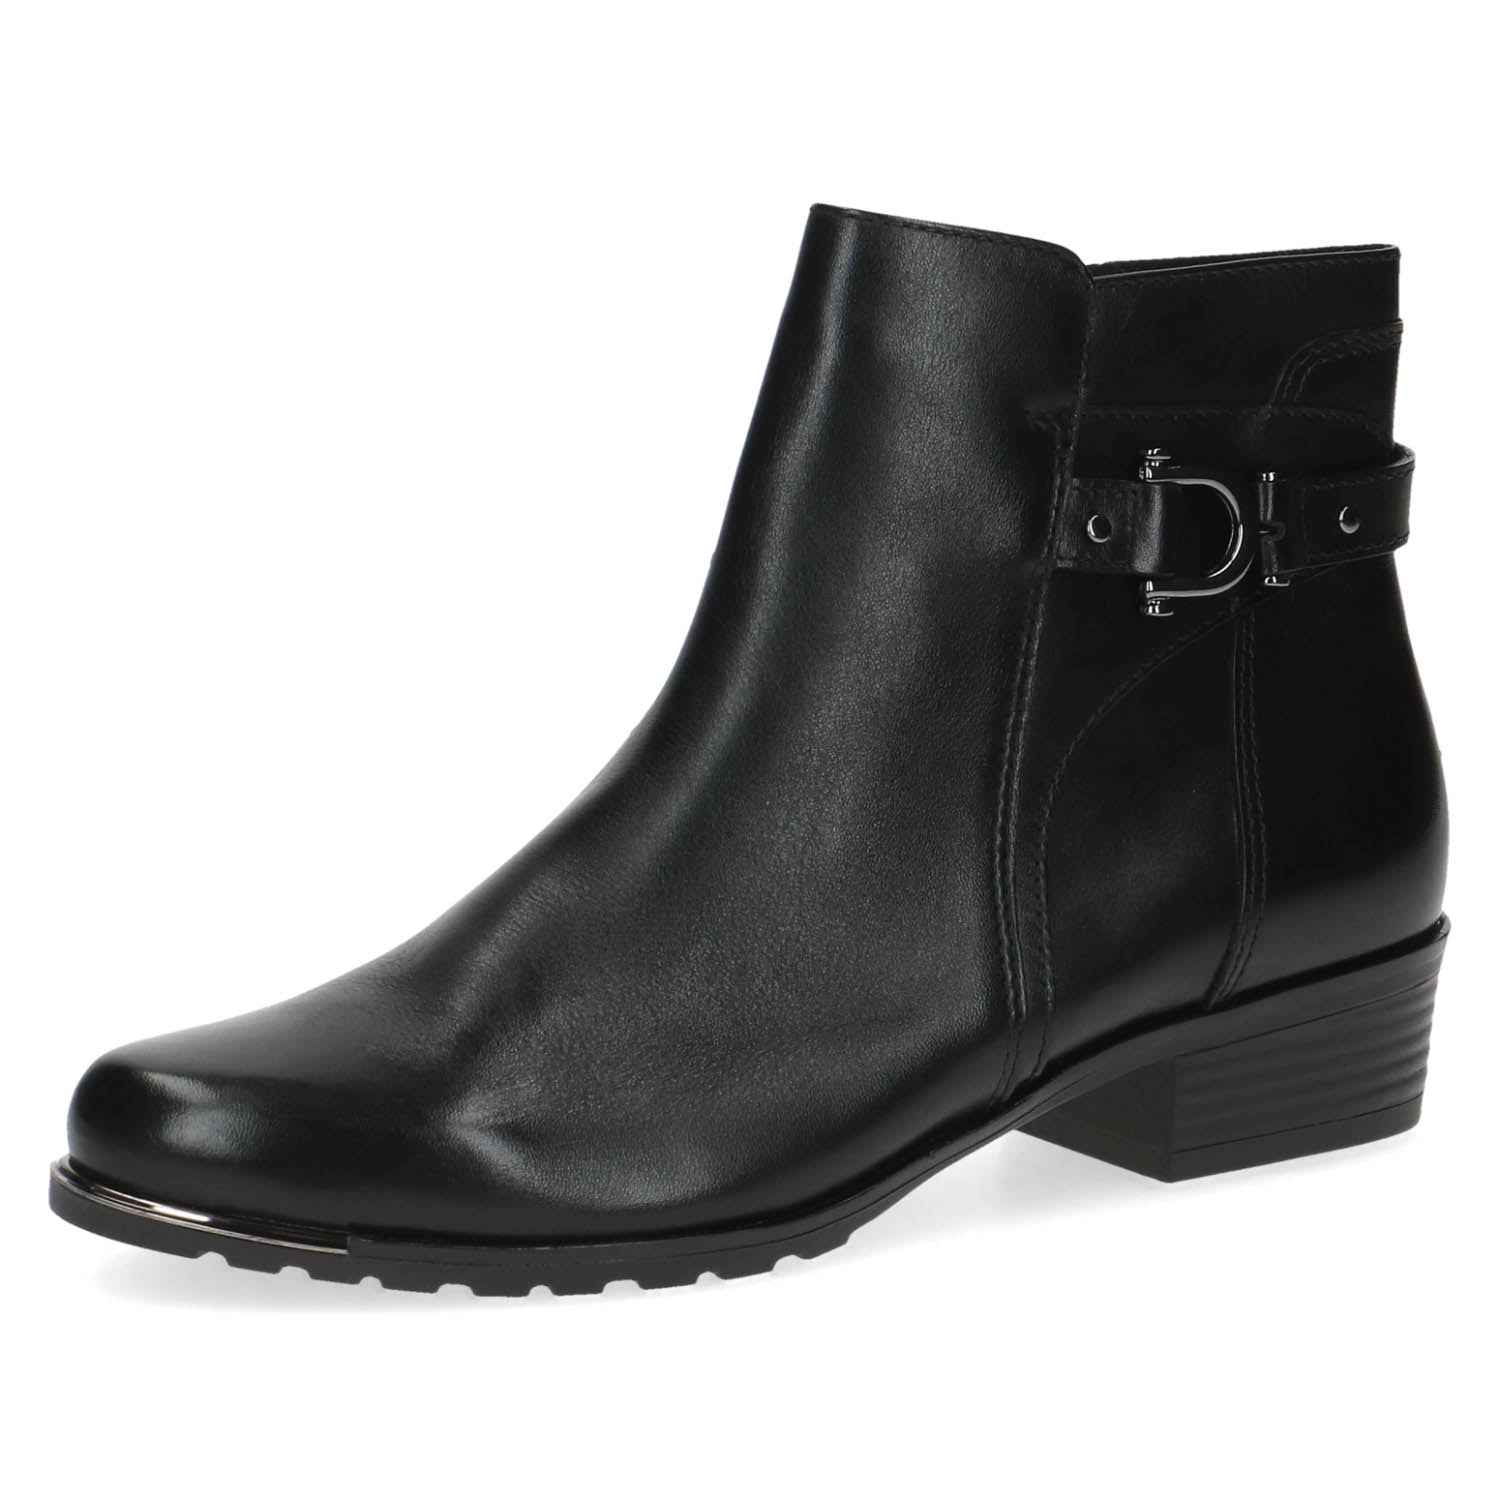 Angled shot of Caprice Black Leather Ankle Boot.